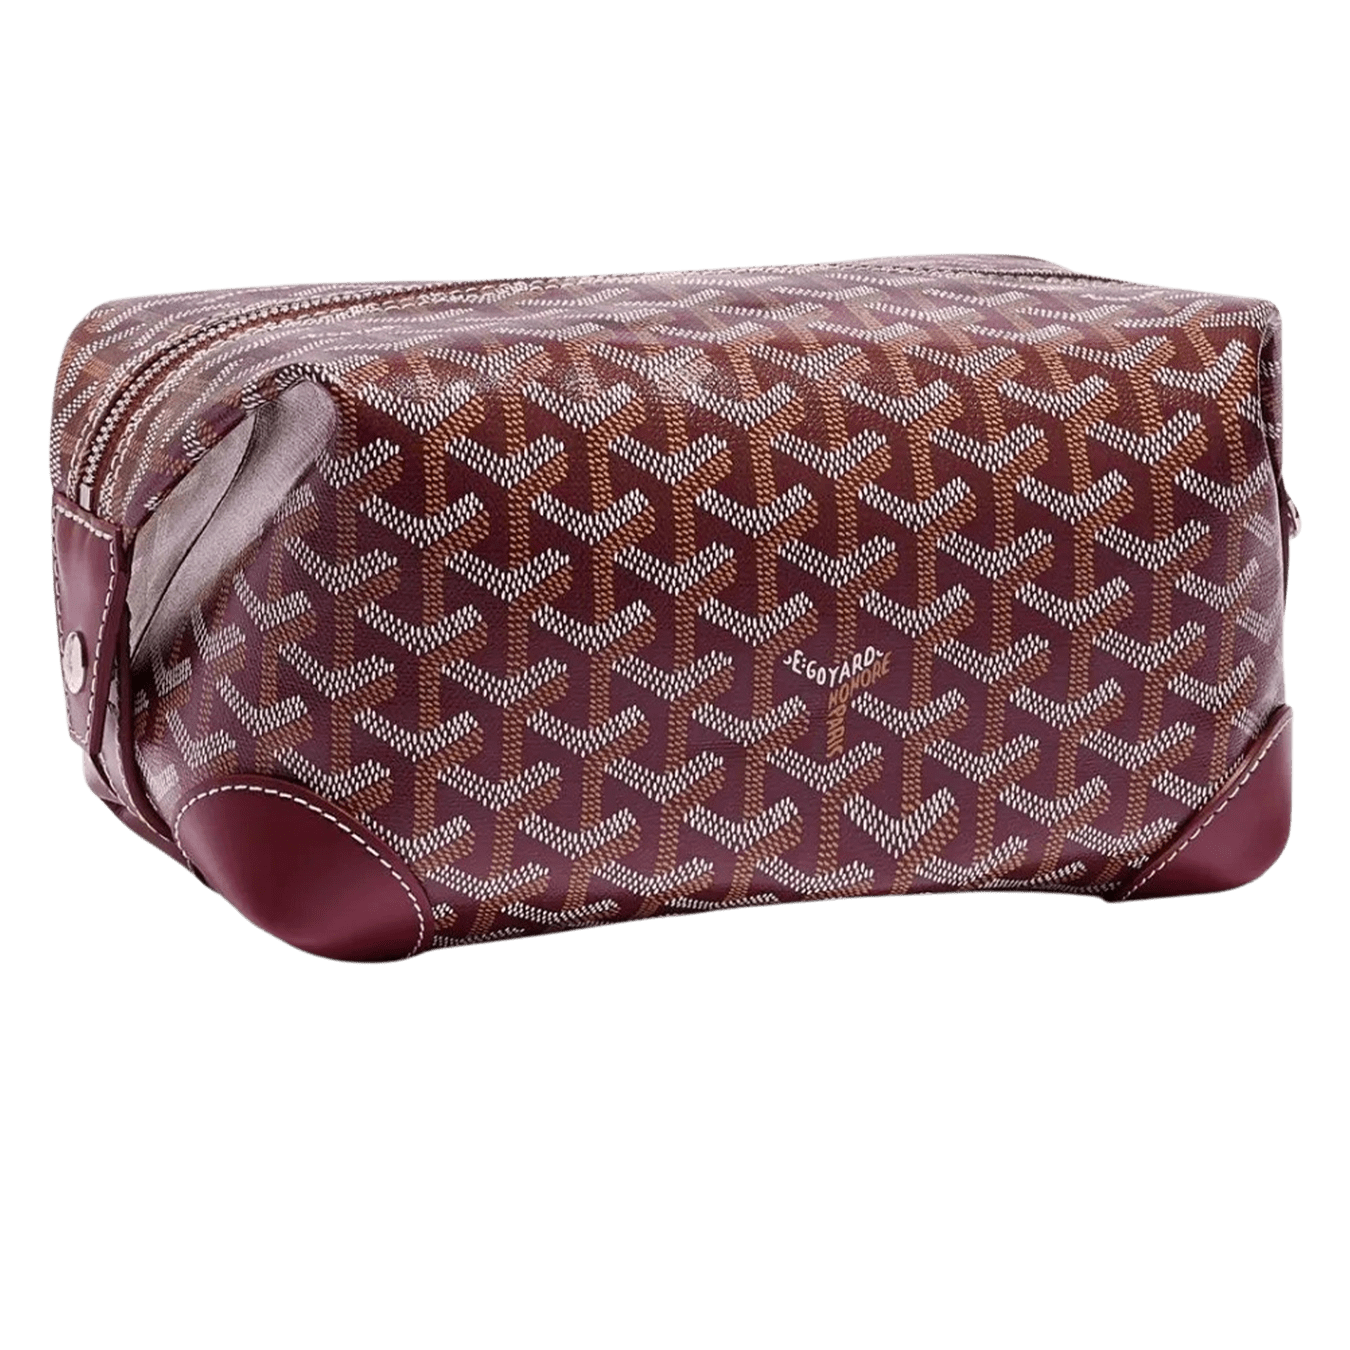 CLOSED* Authenticate This GOYARD, Page 218